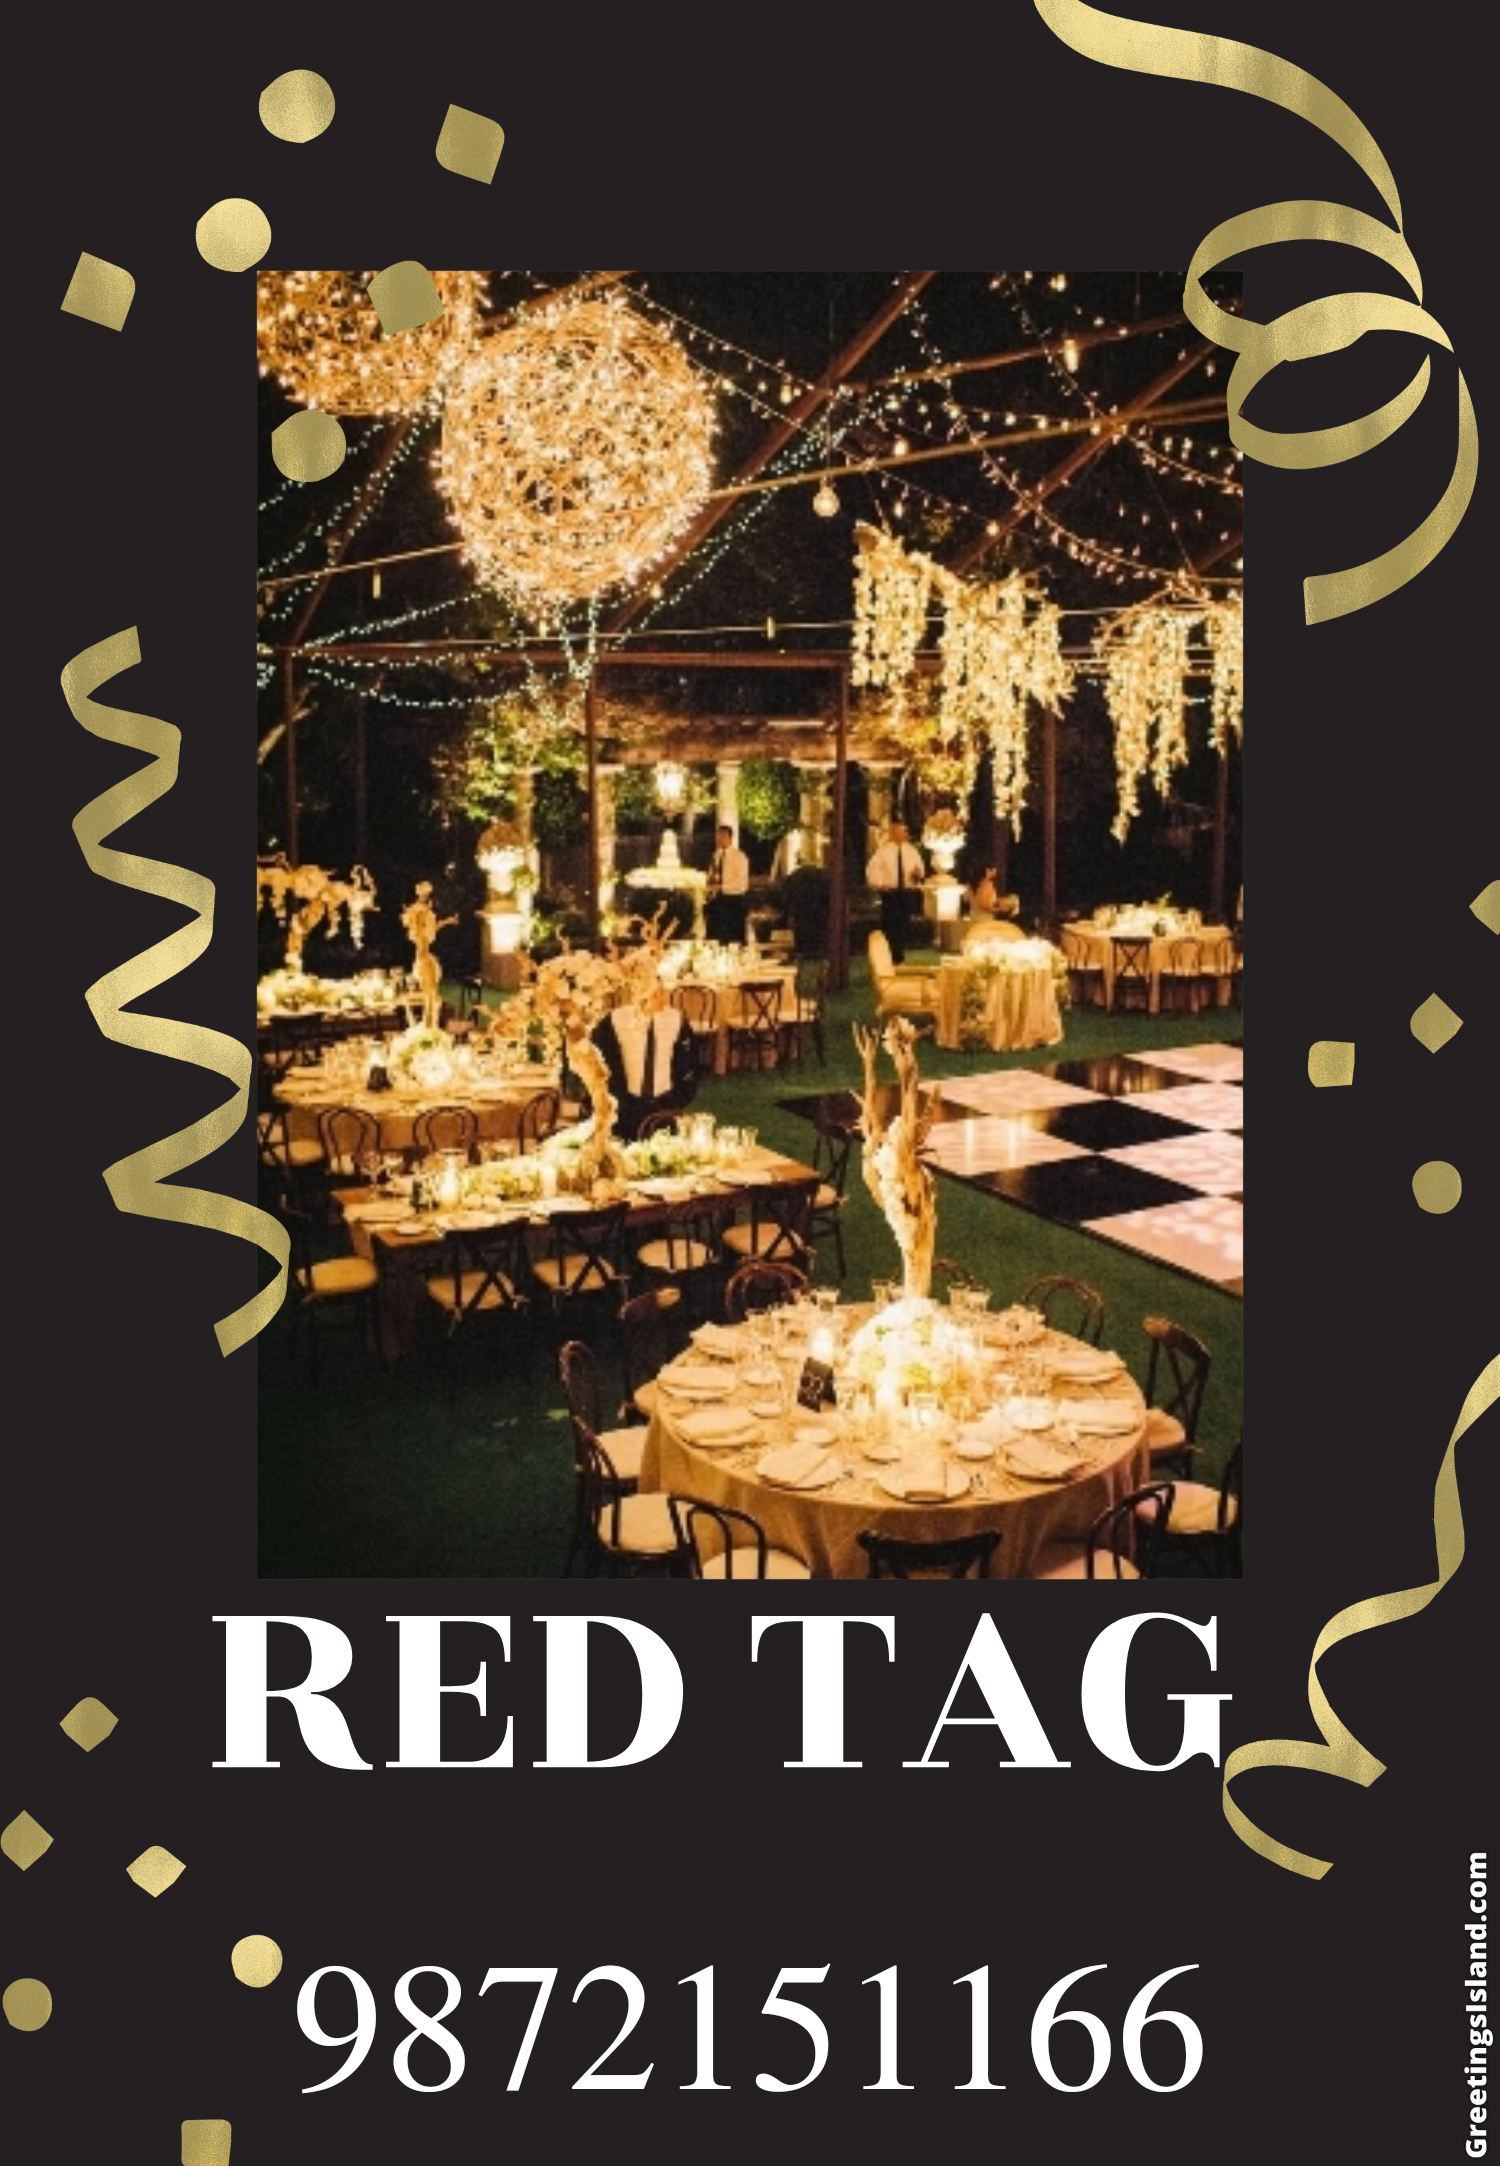 Experienced wedding planner in Chandigarh and Mohali  | Red Tag Caterers | Best wedding in Mohali, top One Wedding planner in Mohali, luxury wedding planner in Mohali, elite wedding planner in Mohali  - GL80495